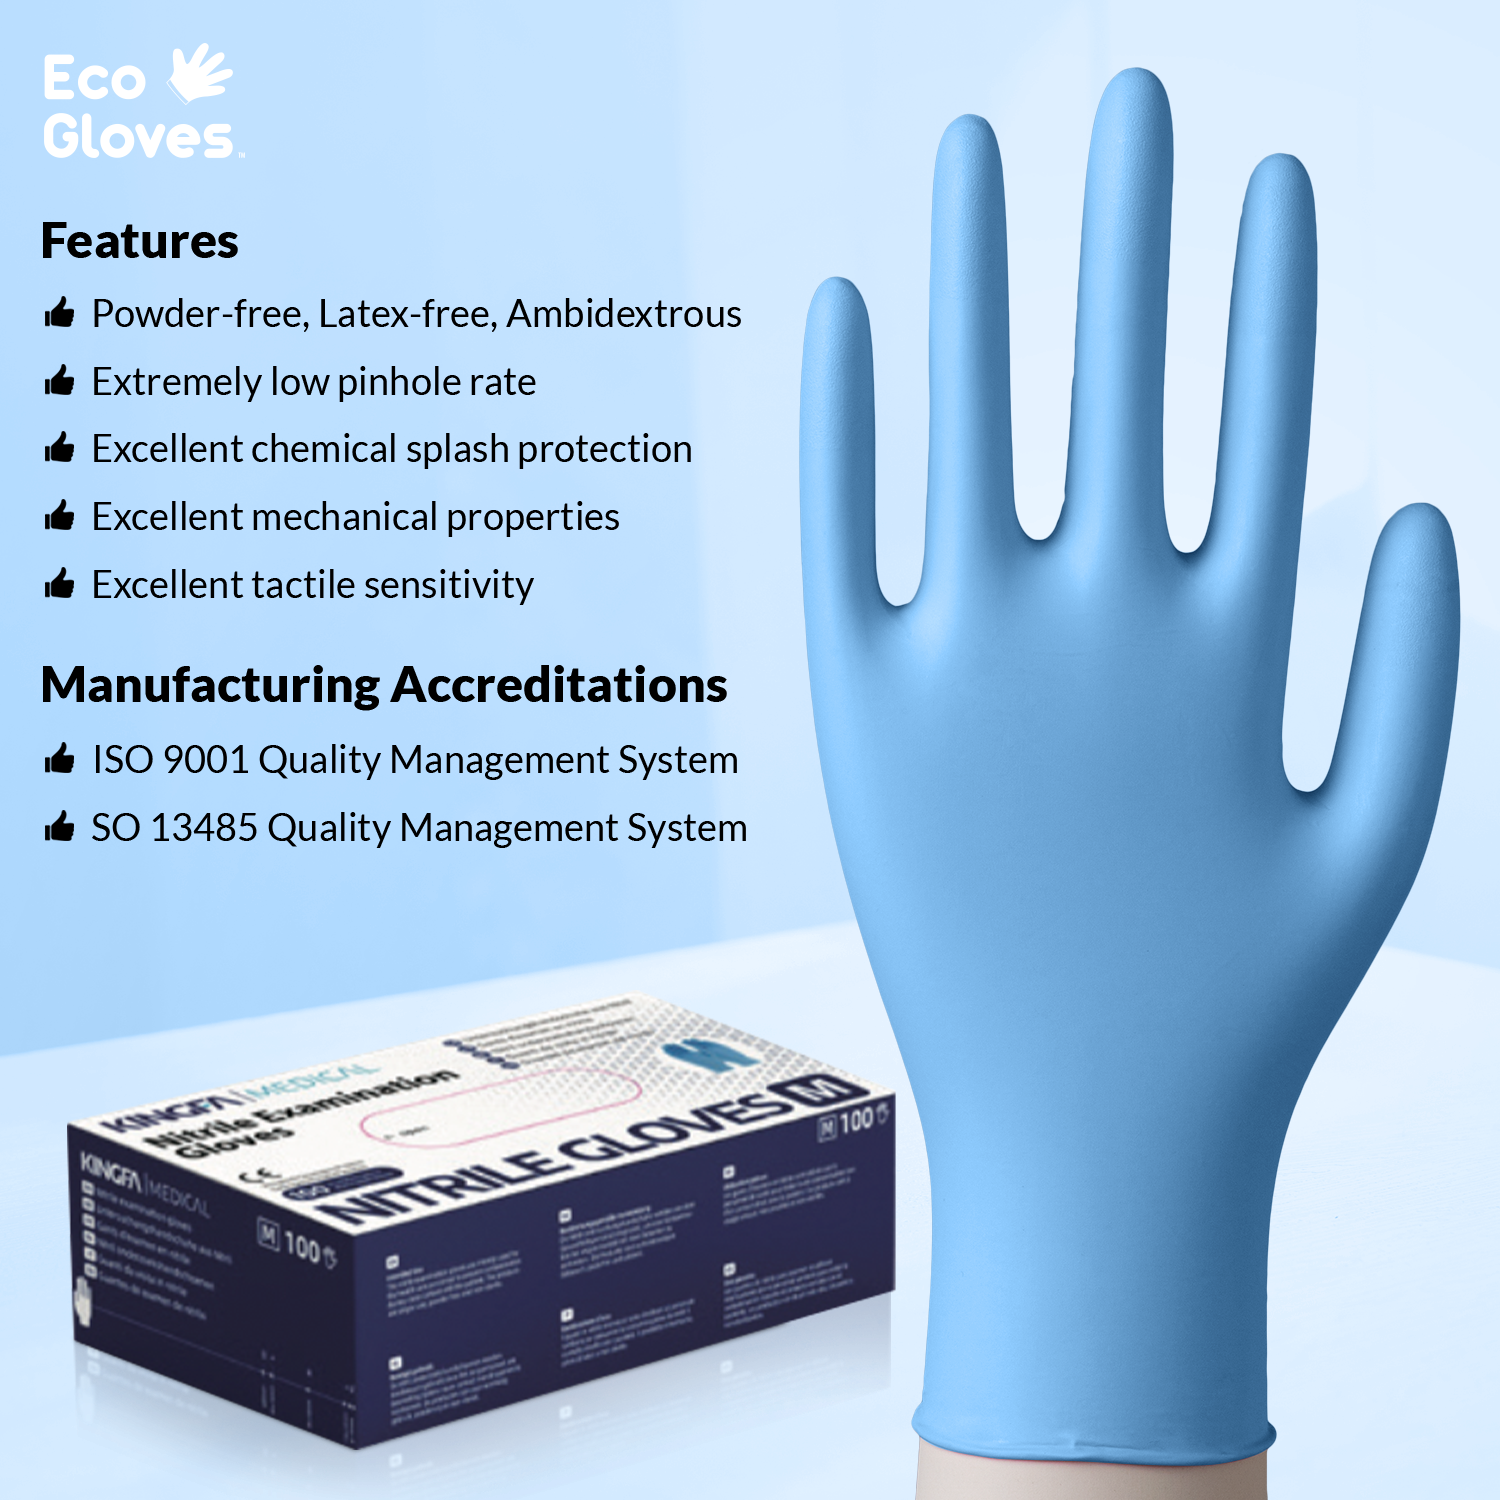 Kingfa Blue Nitrile Disposable Gloves (3.5 mil) 100 Gloves/Box - 100% Recyclable